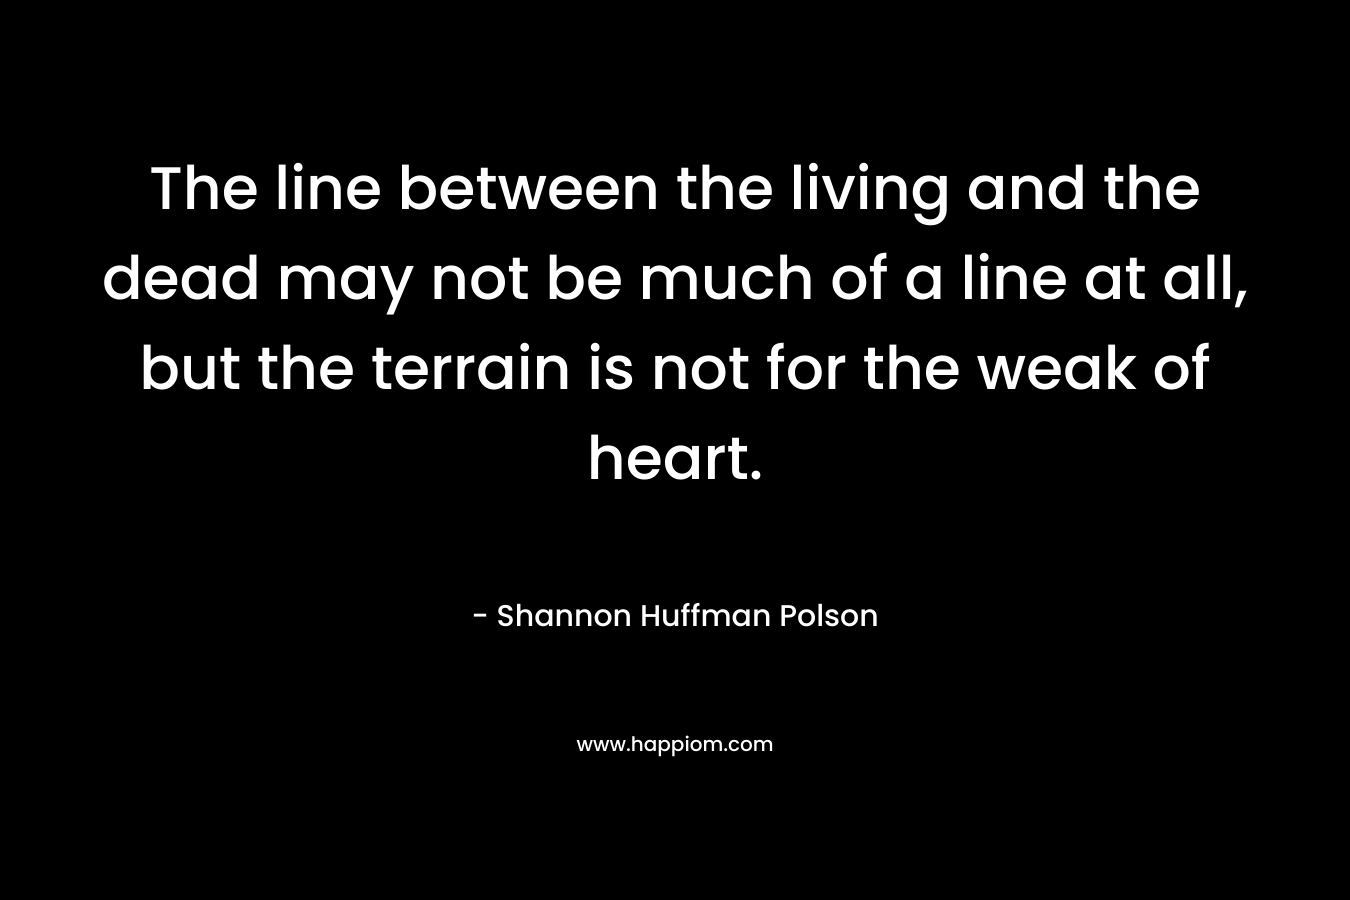 The line between the living and the dead may not be much of a line at all, but the terrain is not for the weak of heart. – Shannon Huffman Polson